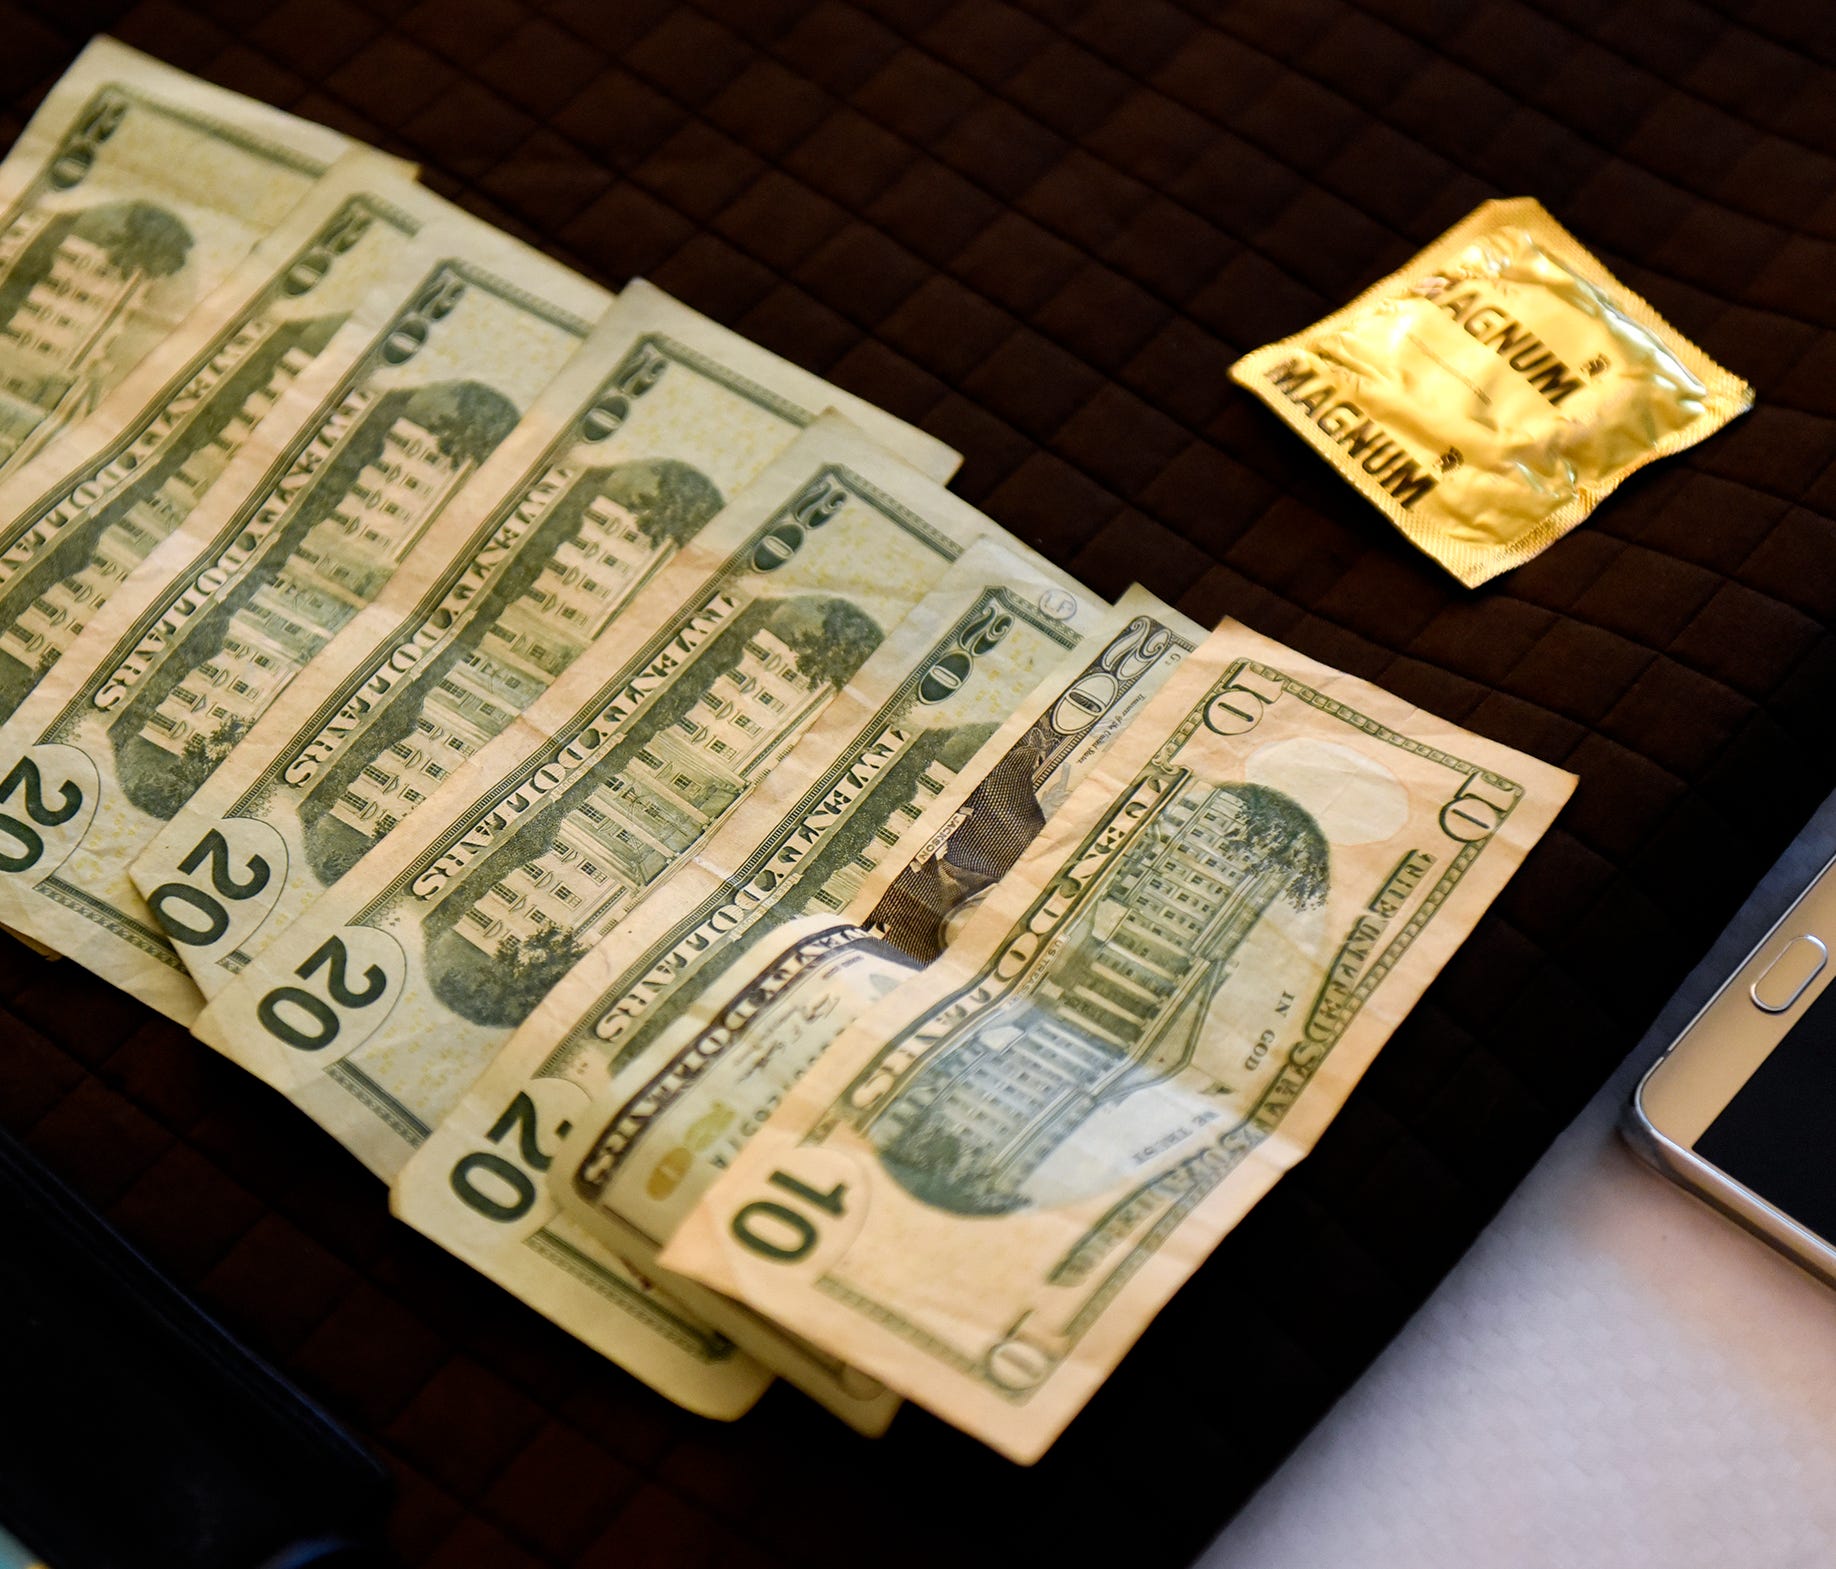 Money and a condom confiscated from a suspected sex buyer are photographed as evidence by members of the Central Minnesota Sex Trafficking Task Force during a June 3, 2016, sting at a St. Cloud hotel.